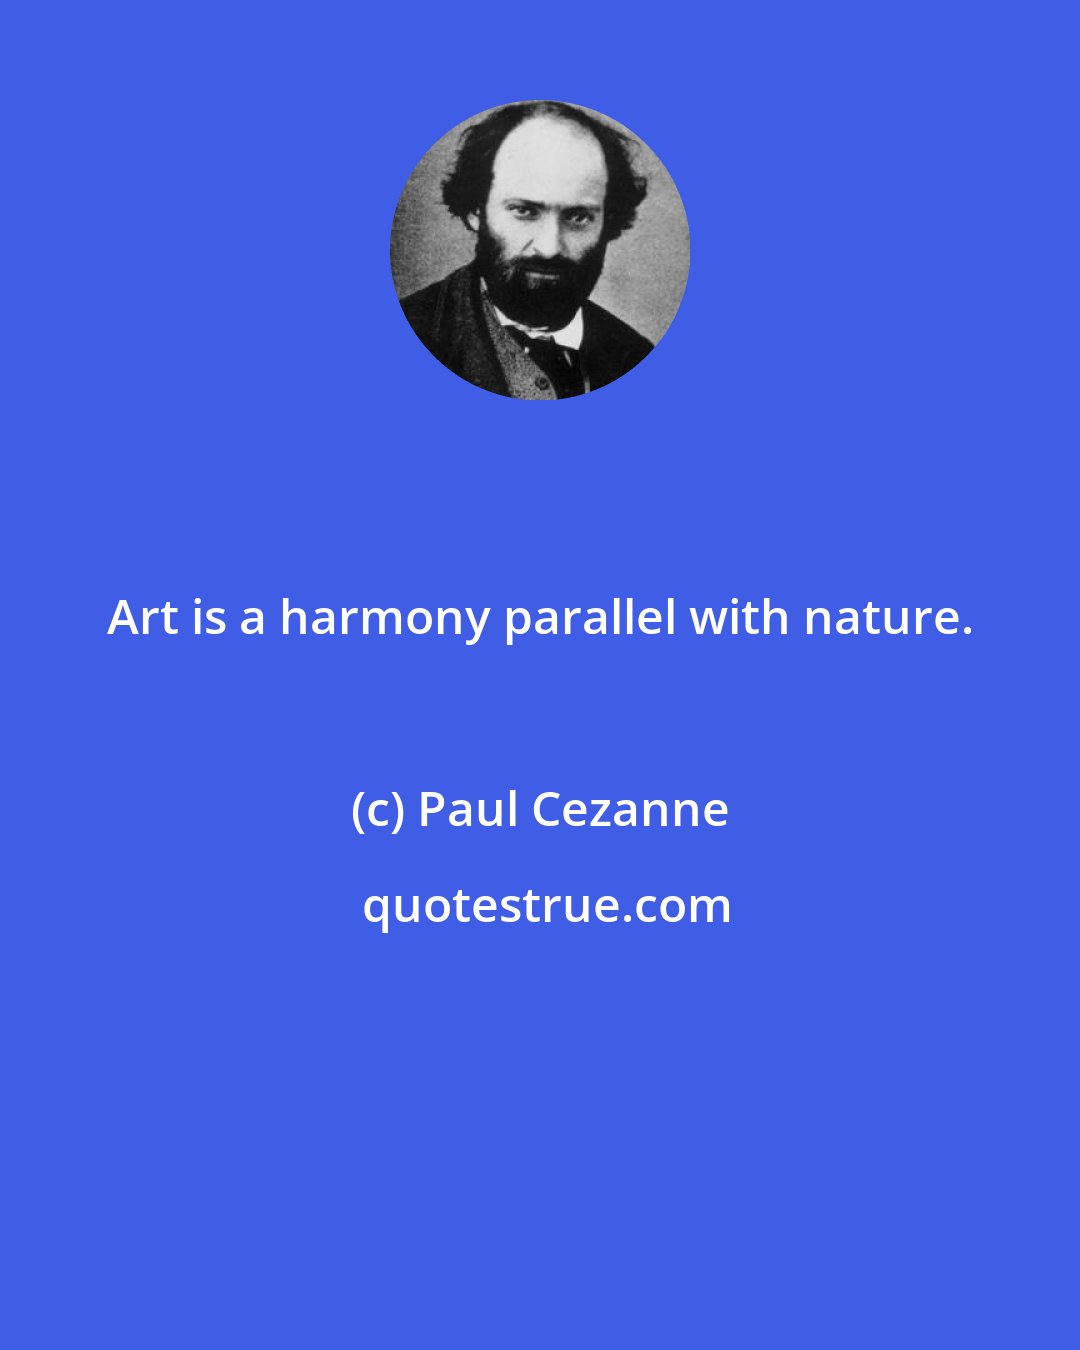 Paul Cezanne: Art is a harmony parallel with nature.